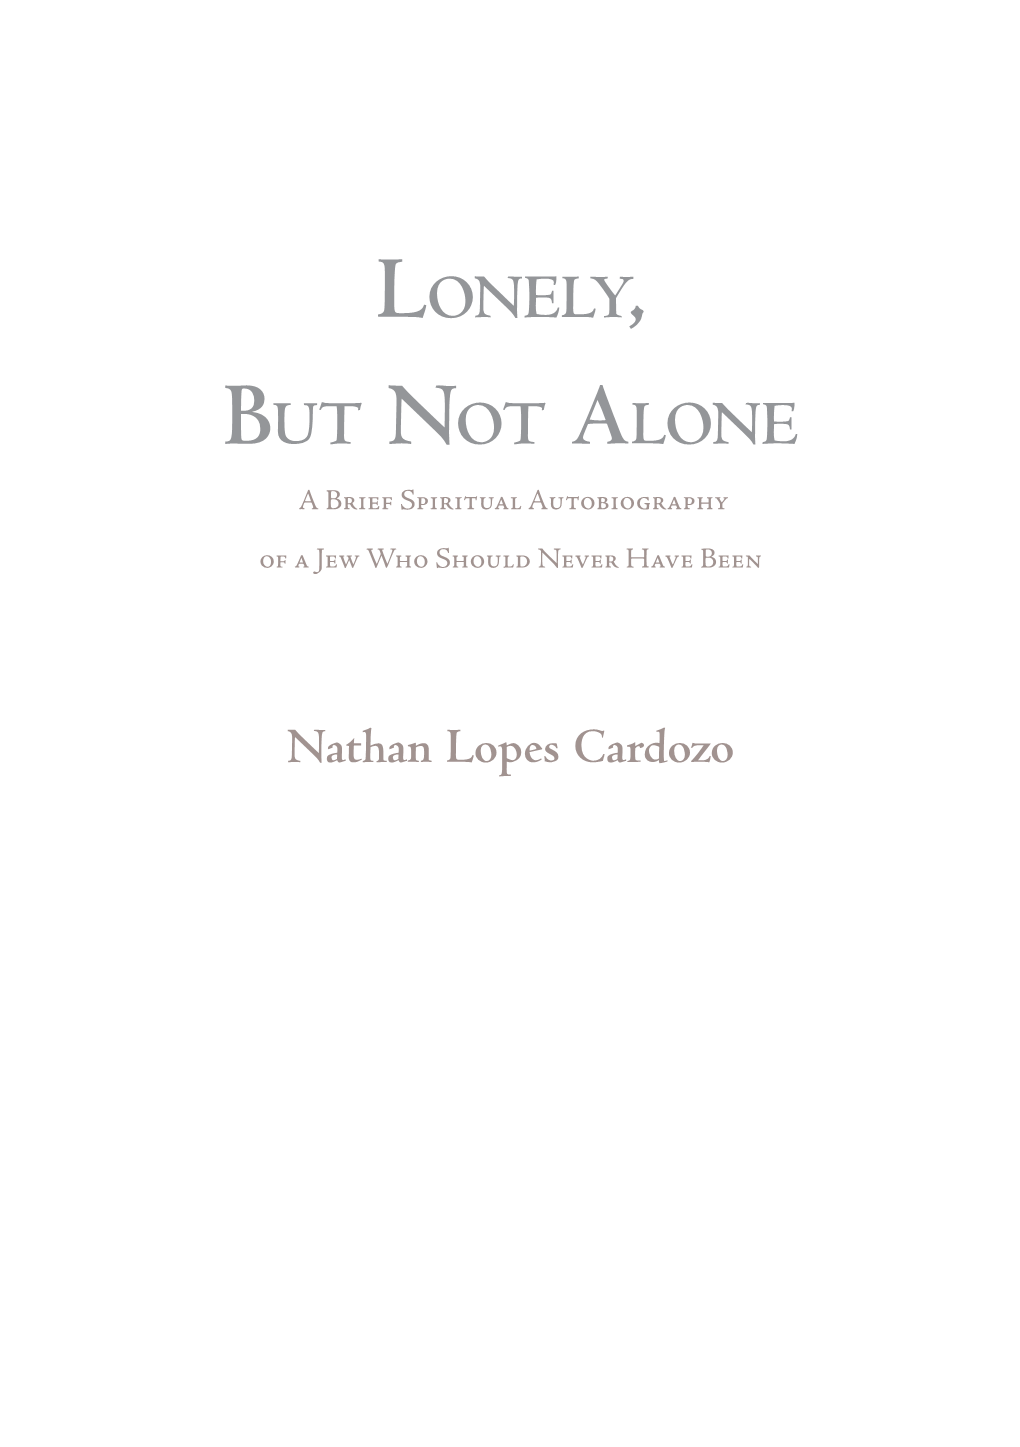 Lonely, but Not Alone a Brief Spiritual Autobiography of a Jew Who Should Never Have Been